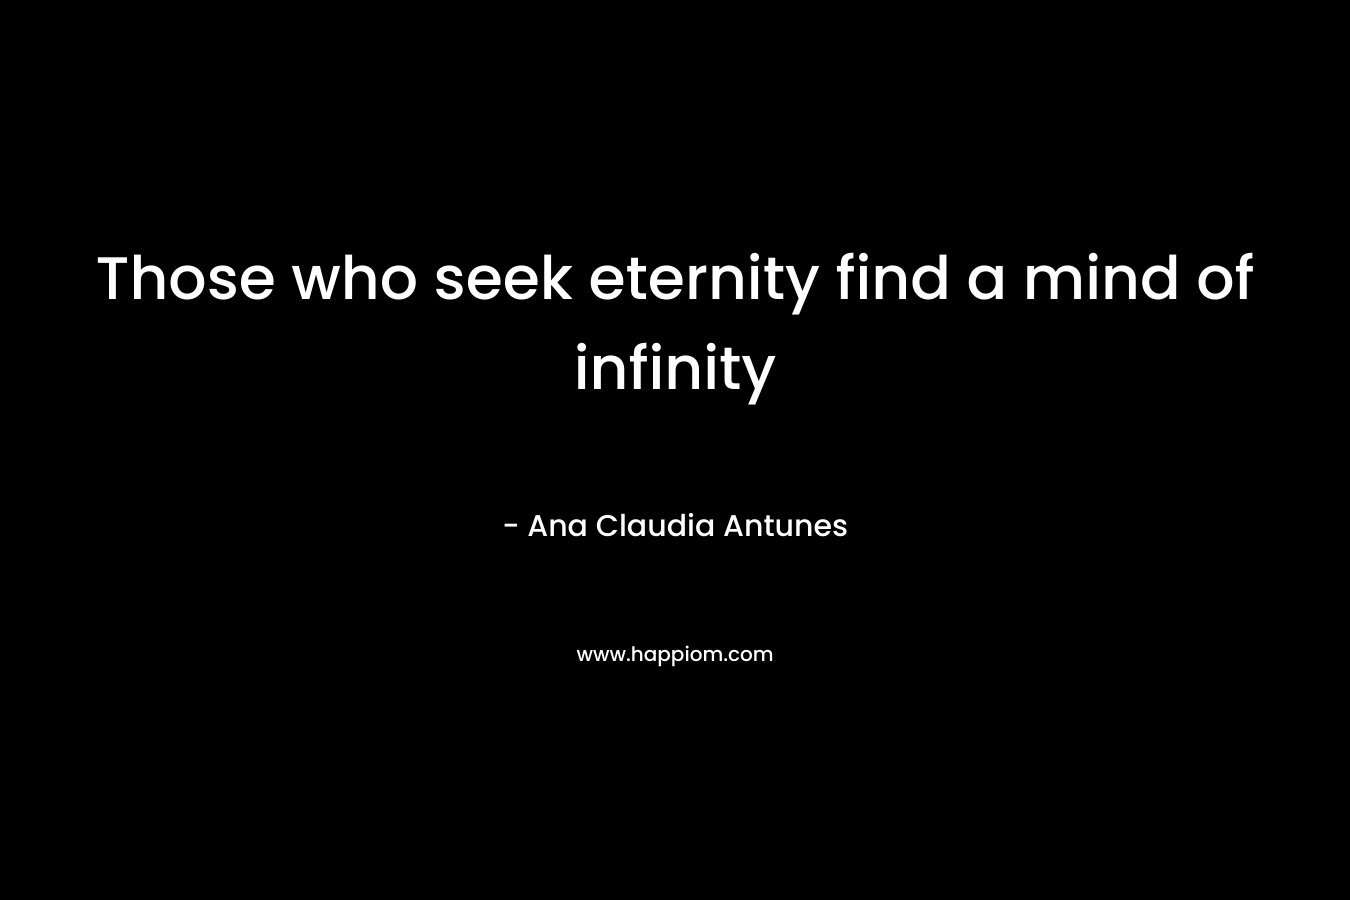 Those who seek eternity find a mind of infinity